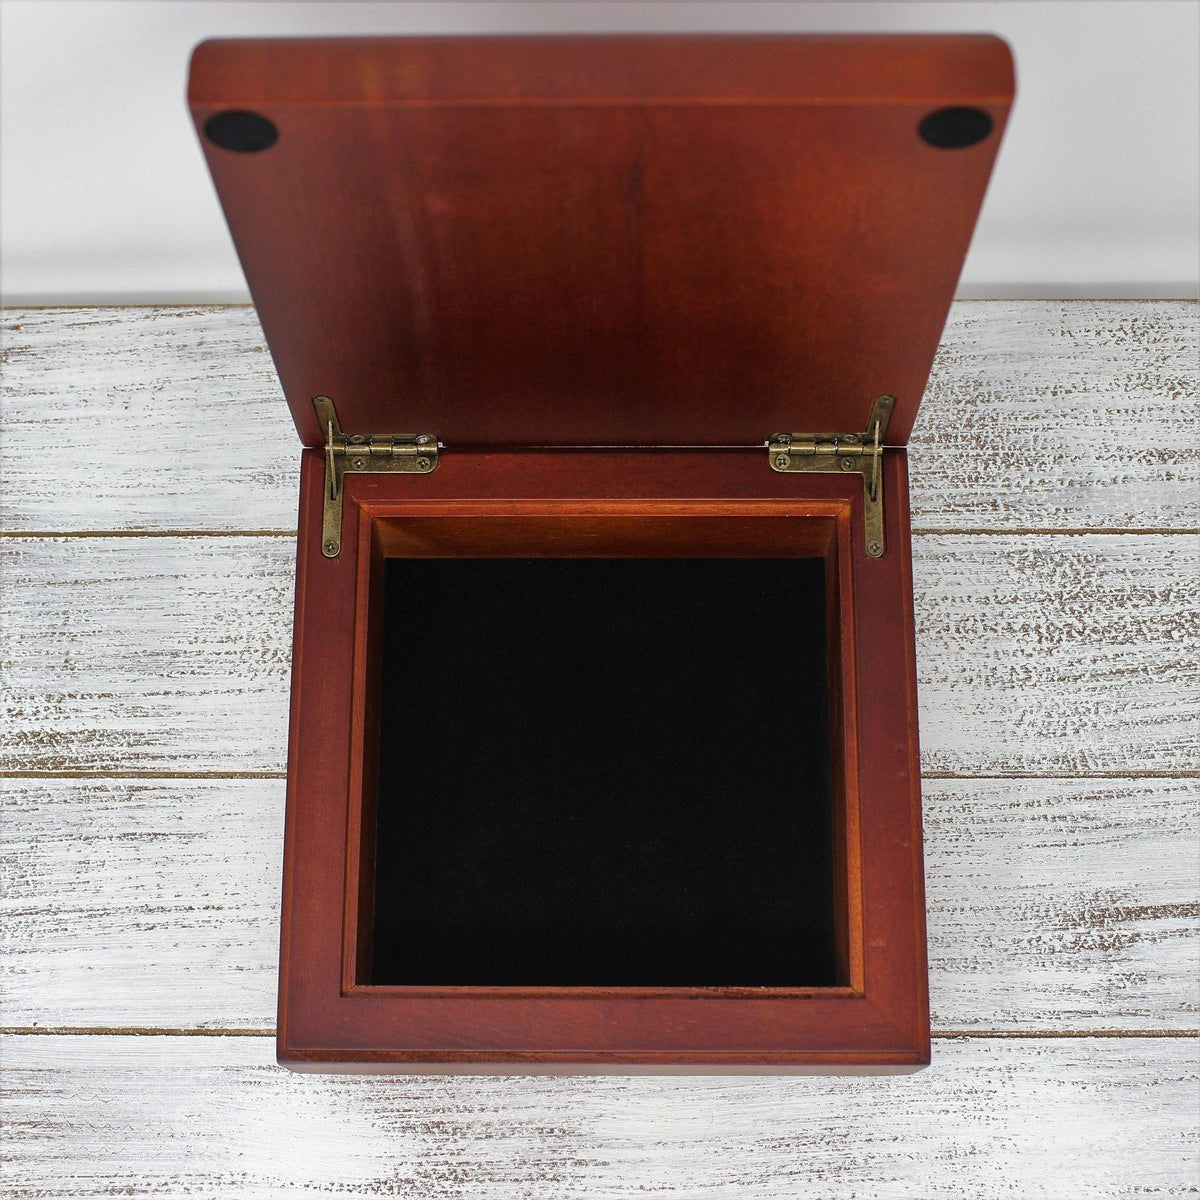 Personalized Mahogany Finished Box w/Hinge Lid | Marble Monogram - This &amp; That Solutions - Personalized Mahogany Finished Box w/Hinge Lid | Marble Monogram - Personalized Gifts &amp; Custom Home Decor